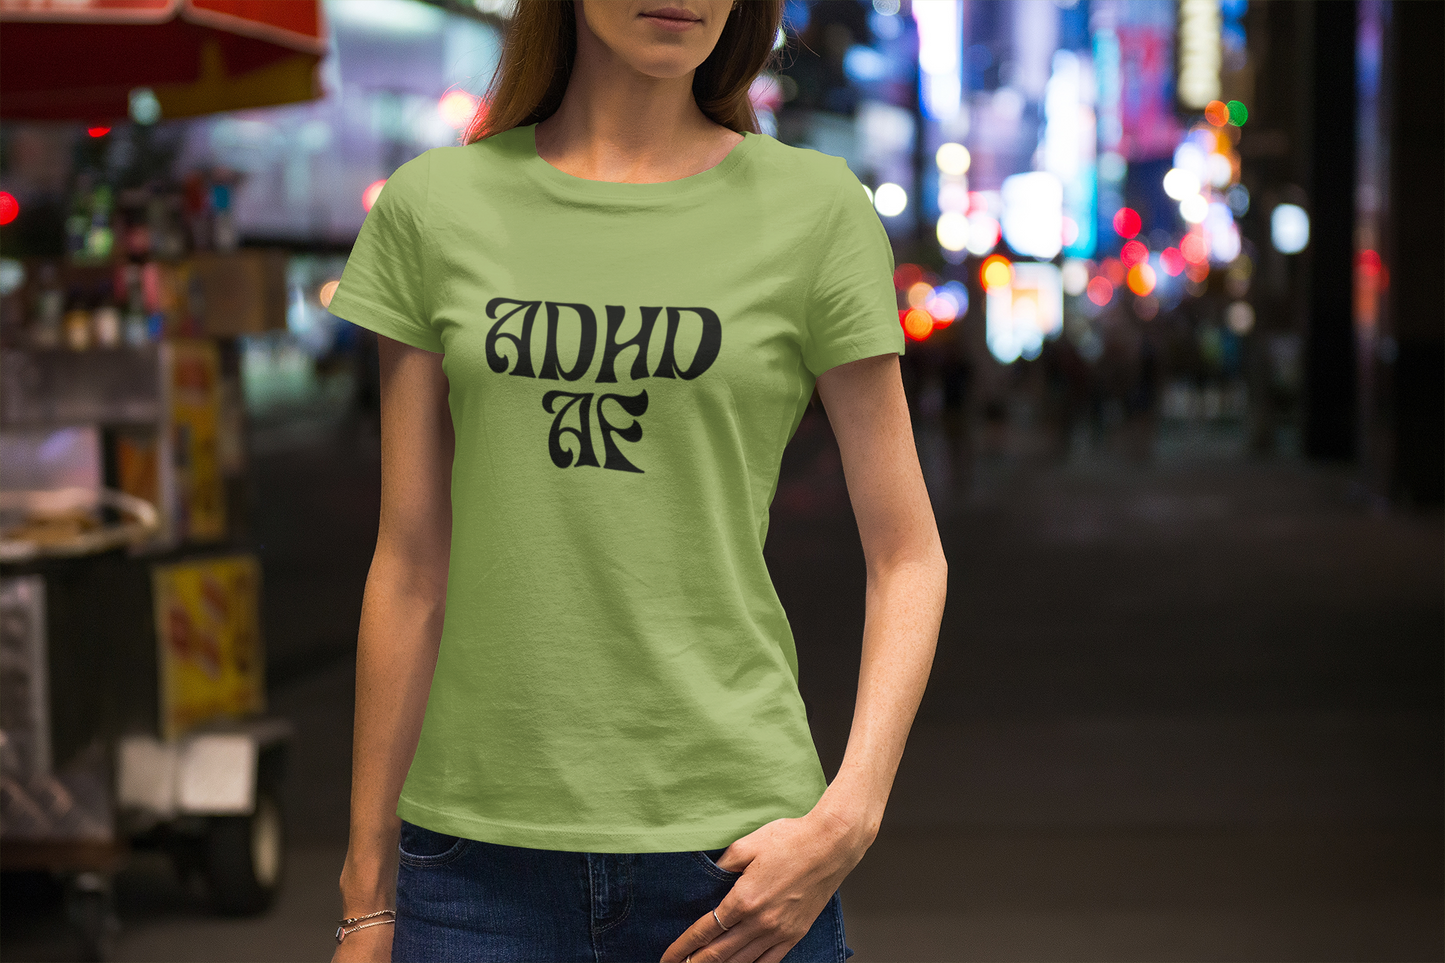 ADHD AF adult t-shirt in the name of ADHD awareness